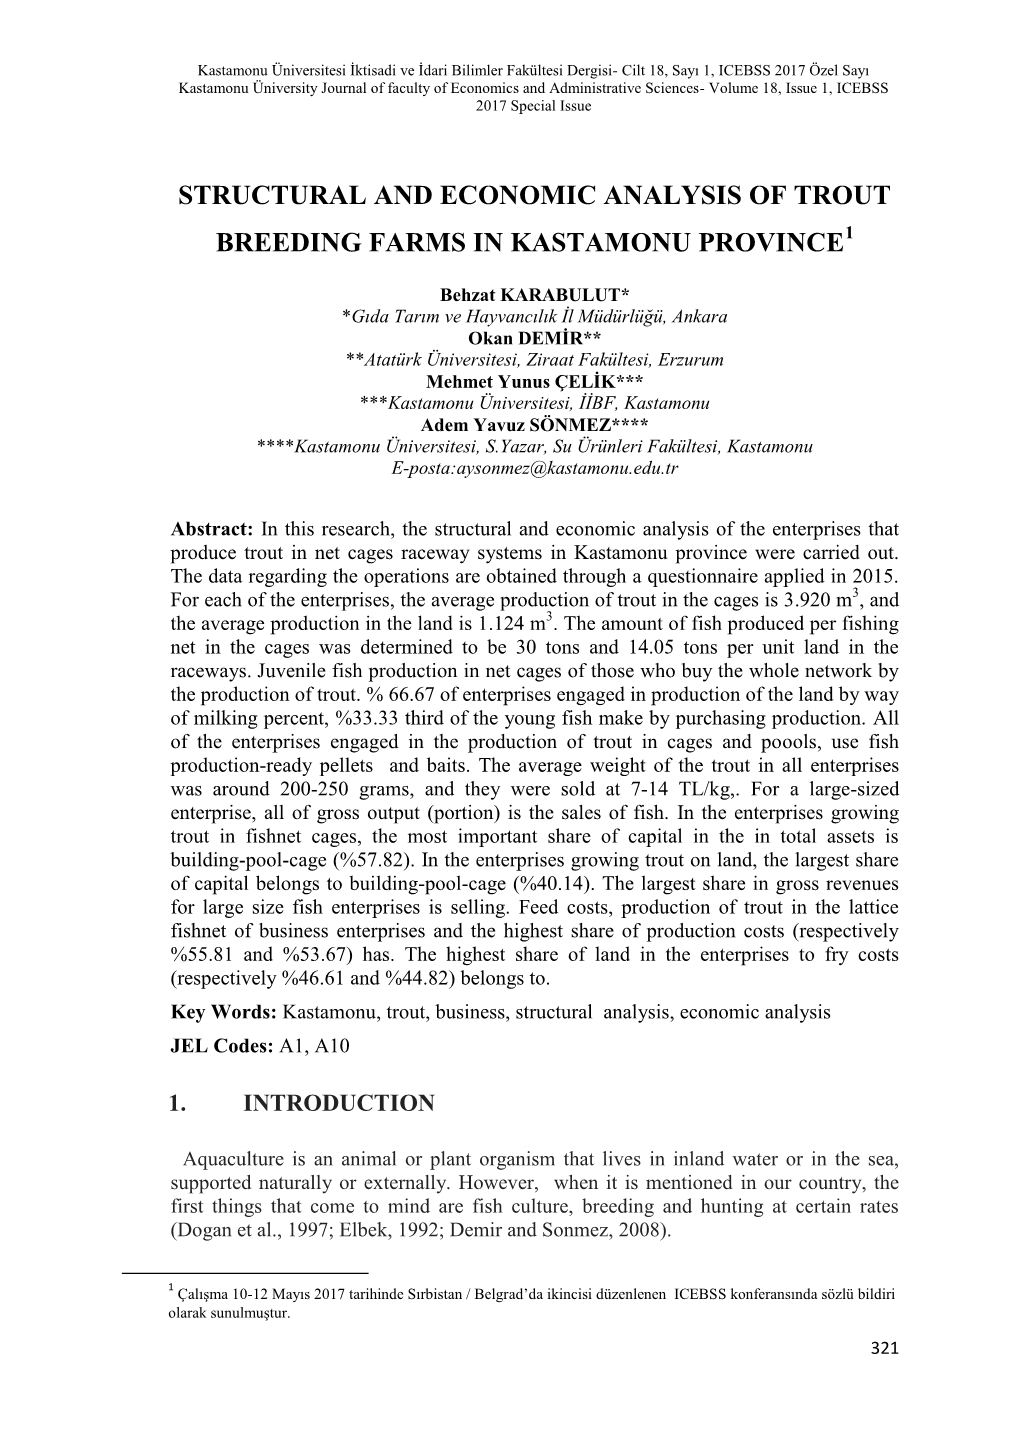 Structural and Economic Analysis of Trout Breeding Farms in Kastamonu Province1